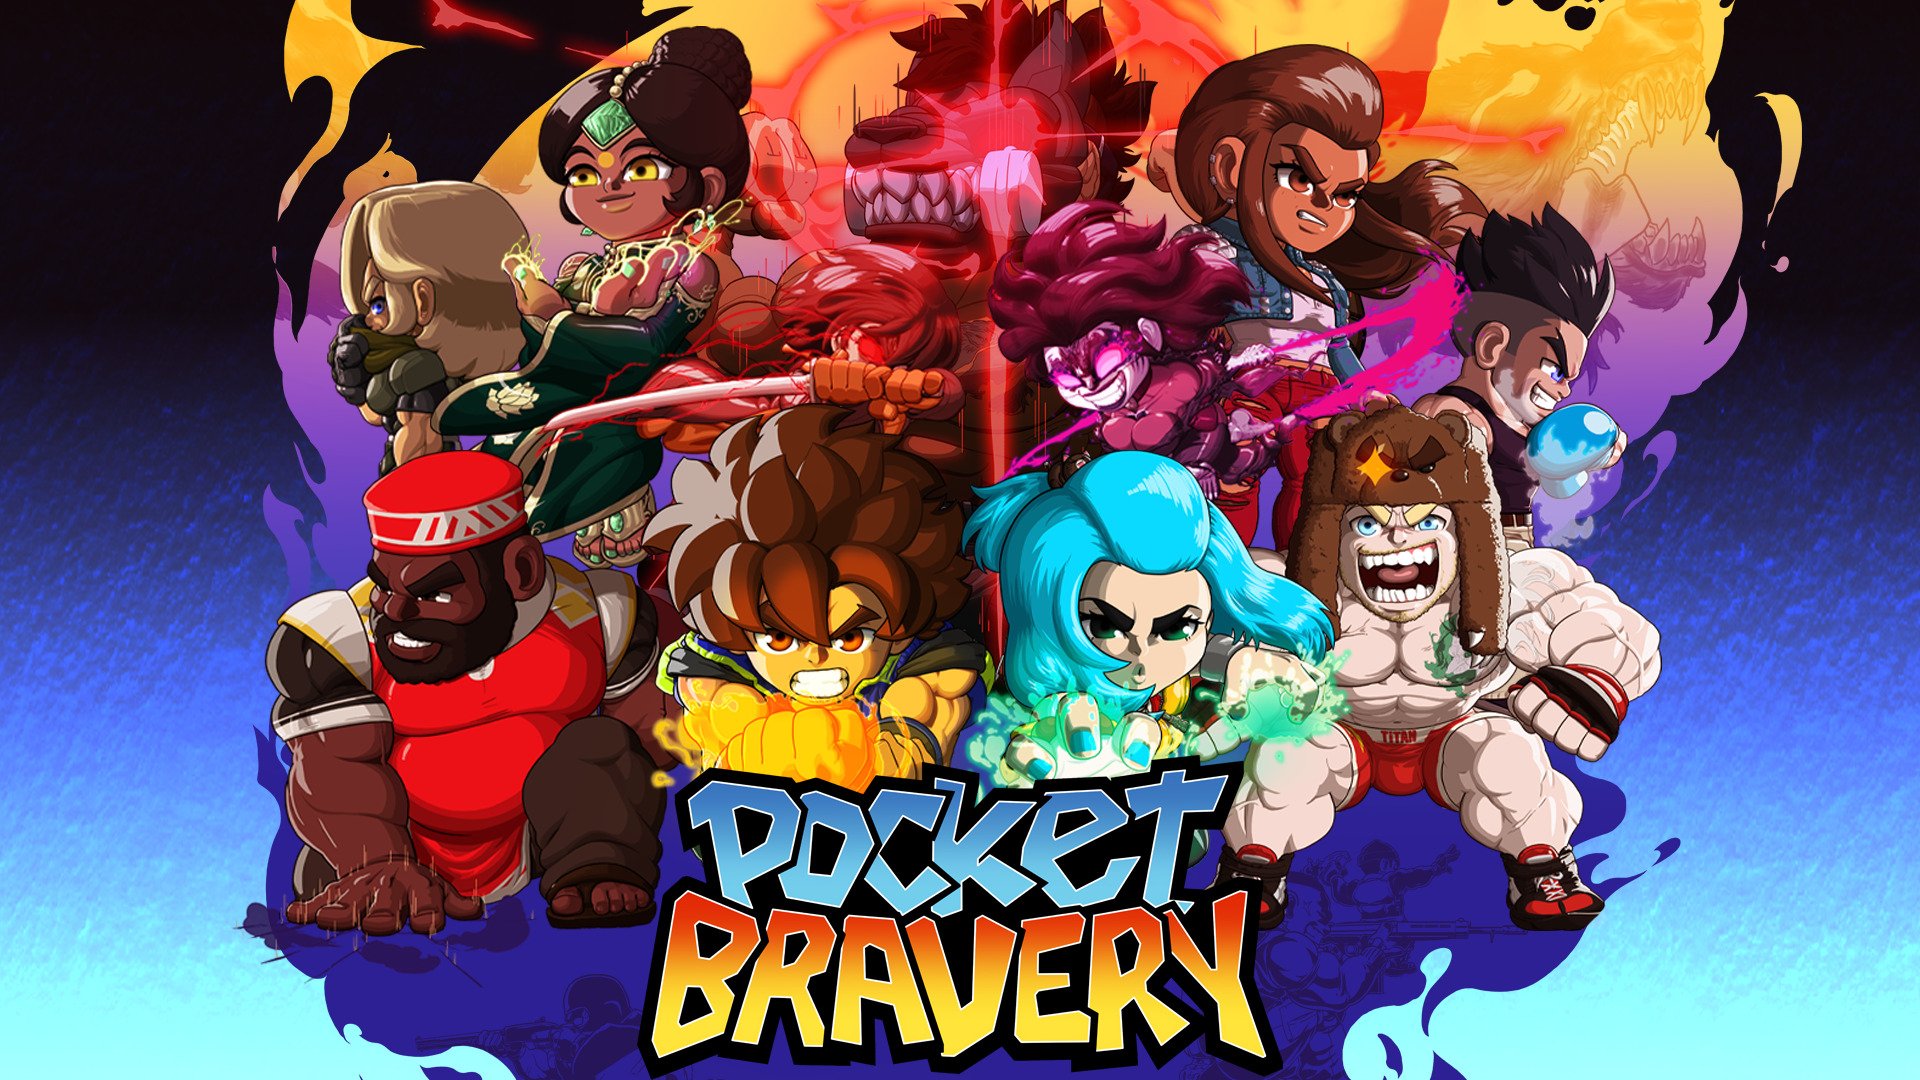 #
      Pocket Bravery to be published by PQube